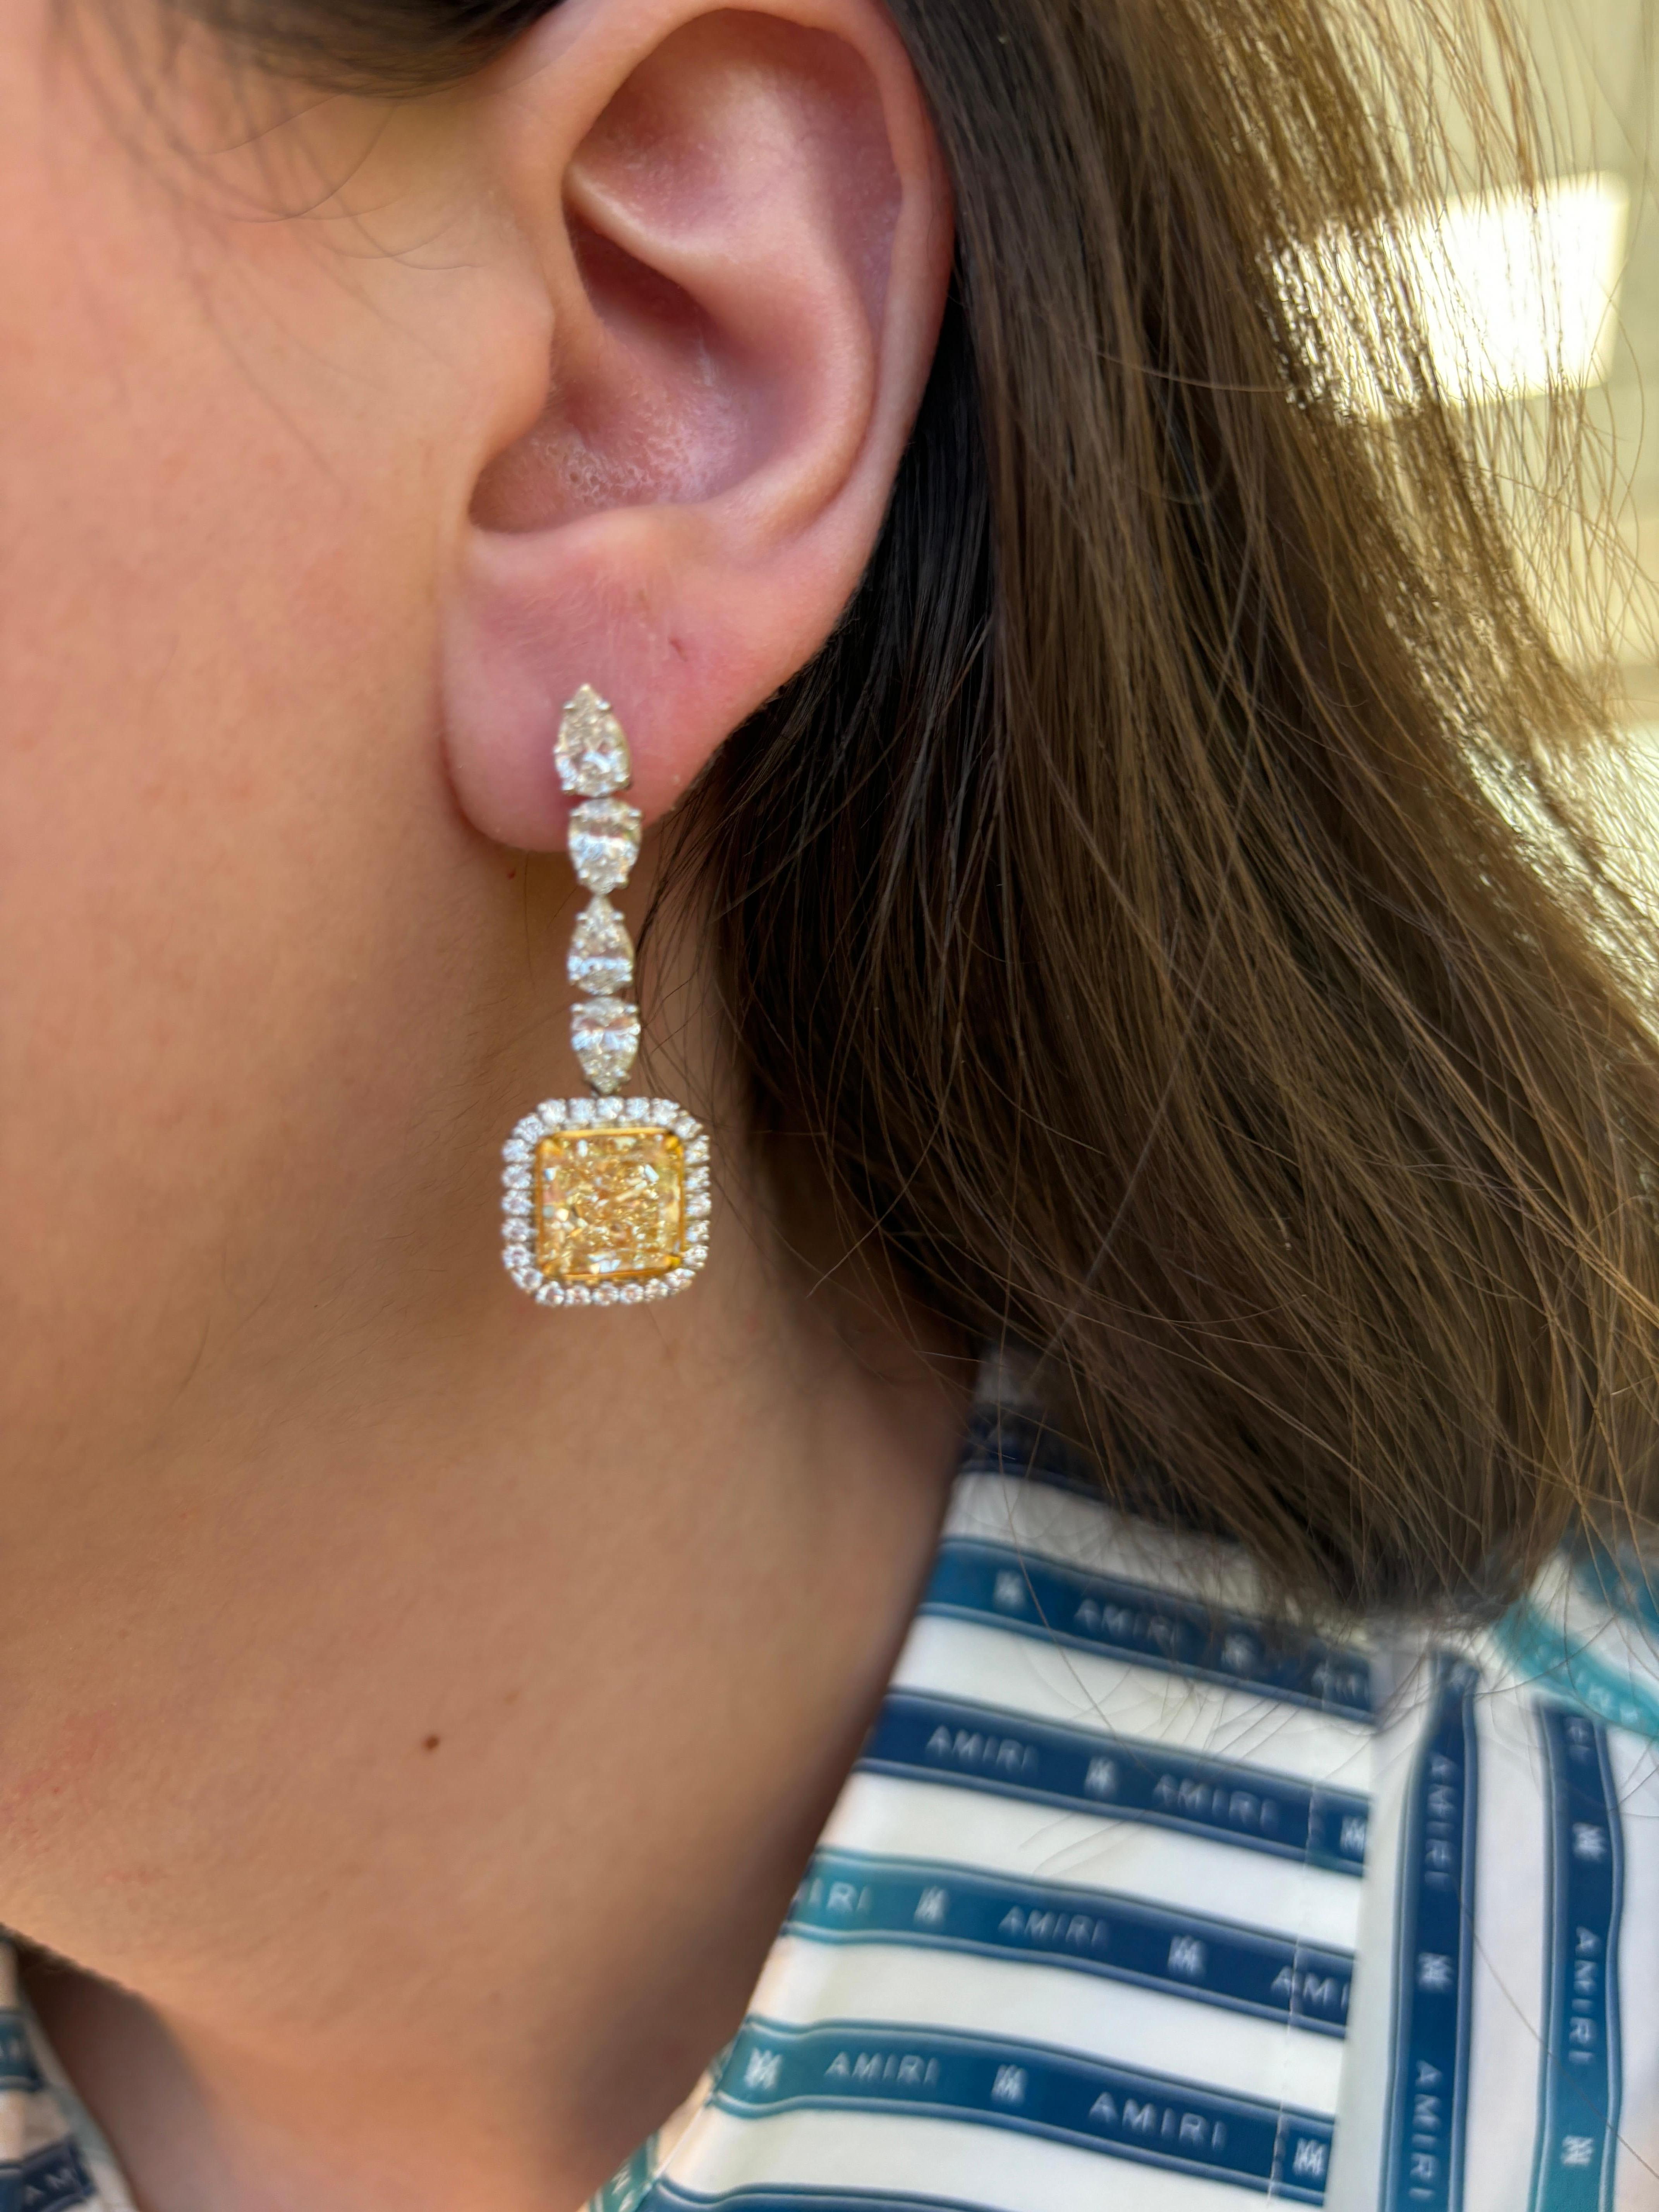 Stunning yellow diamond drop earrings with pear shape diamonds and halo, EGL certified. High jewelry by Alexander Beverly Hills.  
9.20 carats total diamond weight.
2 radiant cut diamonds, 6.19 carats. Both Fancy Yellow color and VVS2 clarity grade,